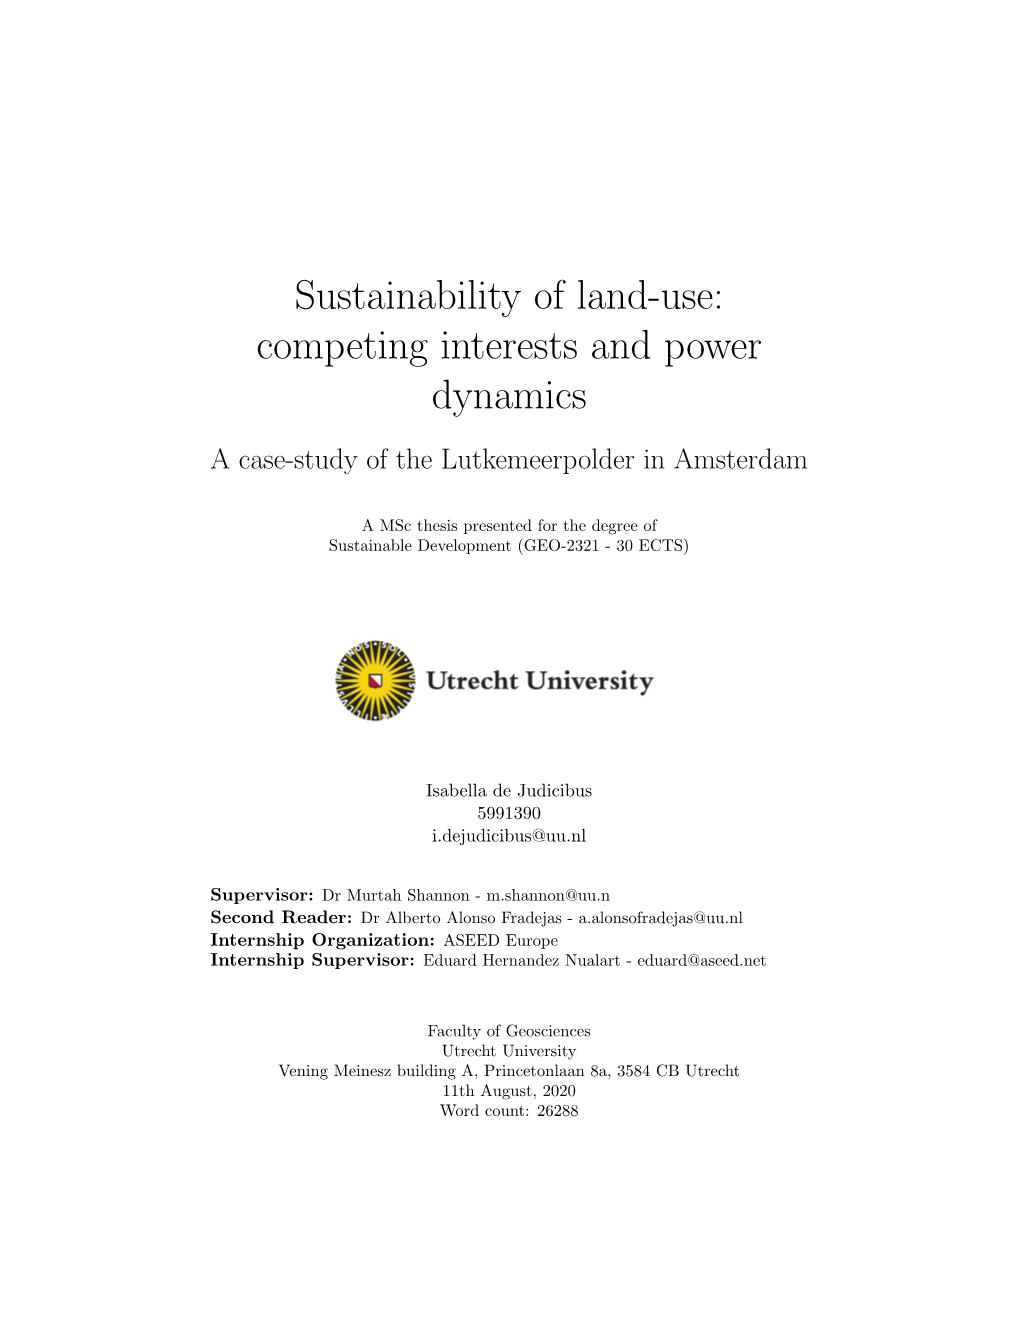 Sustainability of Land-Use: Competing Interests and Power Dynamics